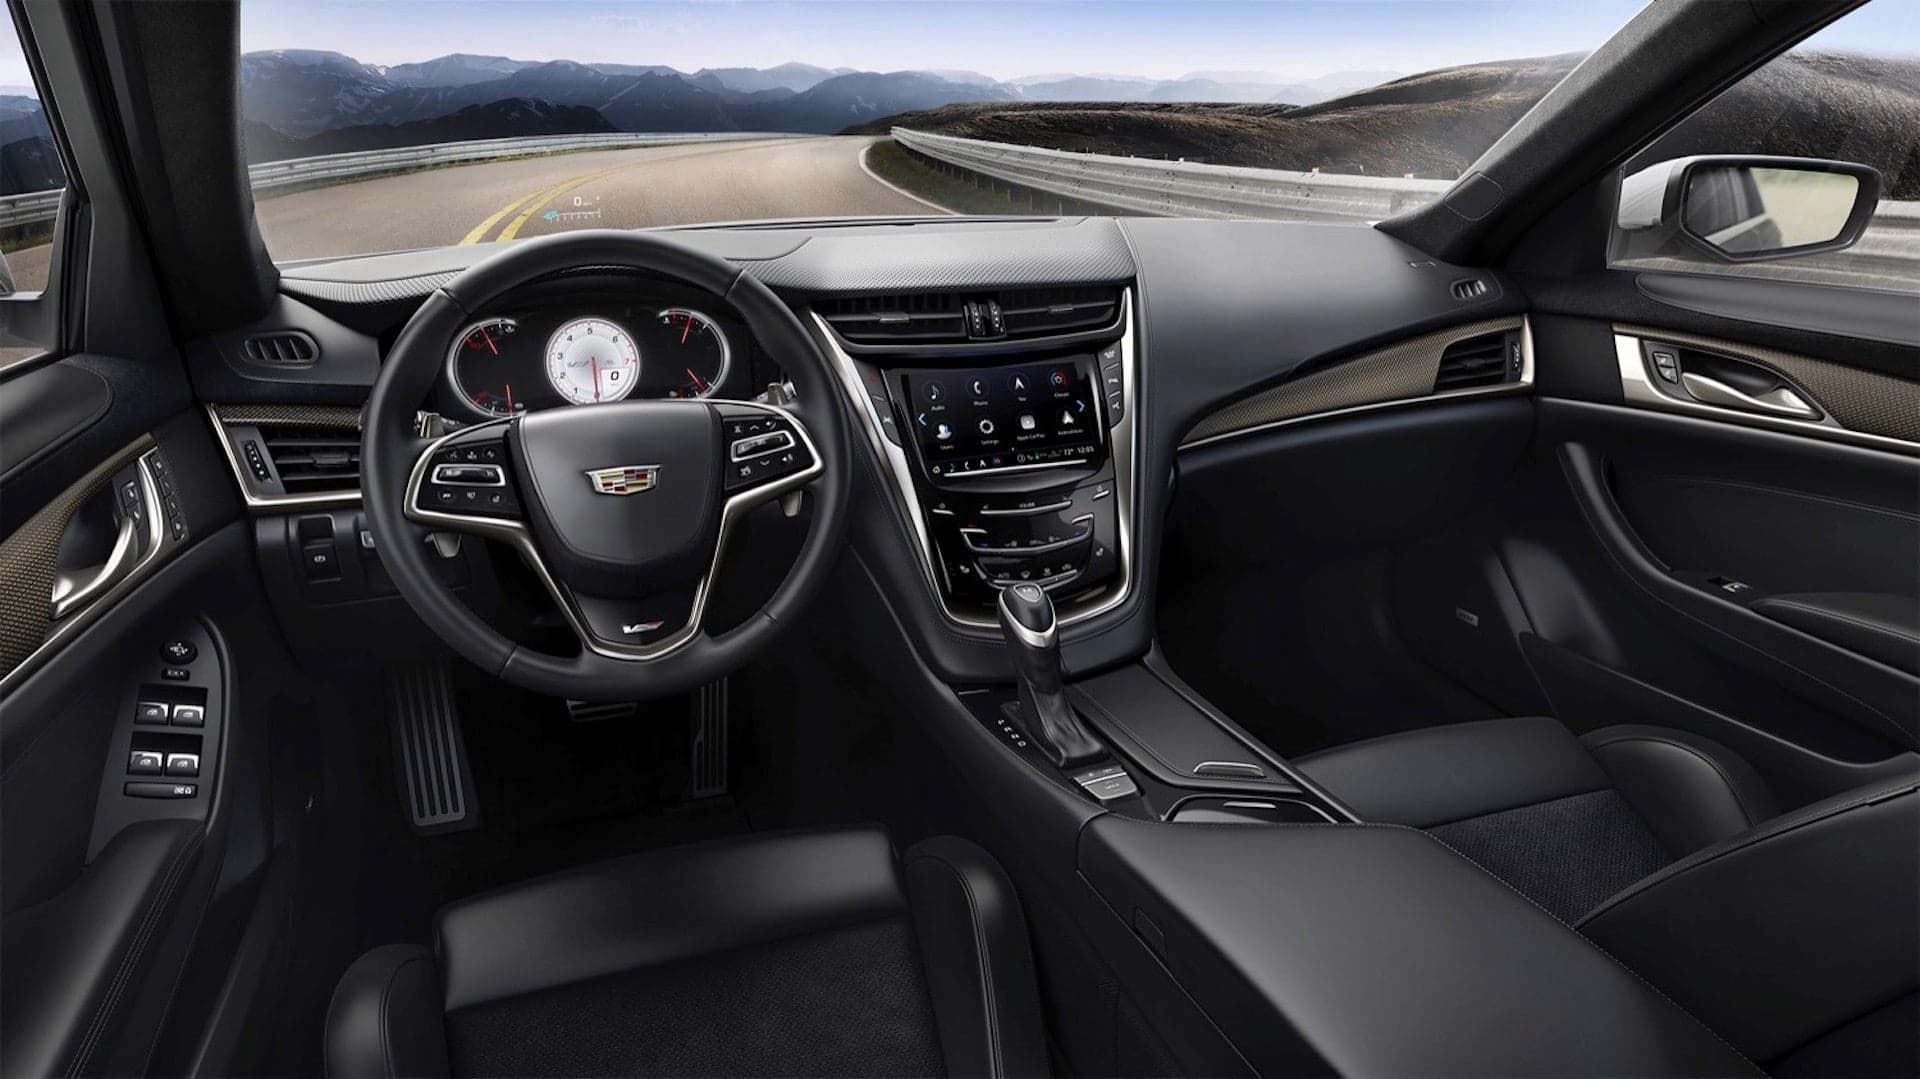 Cadillac’s New Infotainment System Packs Cloud-Based Profiles and Live Data Streams